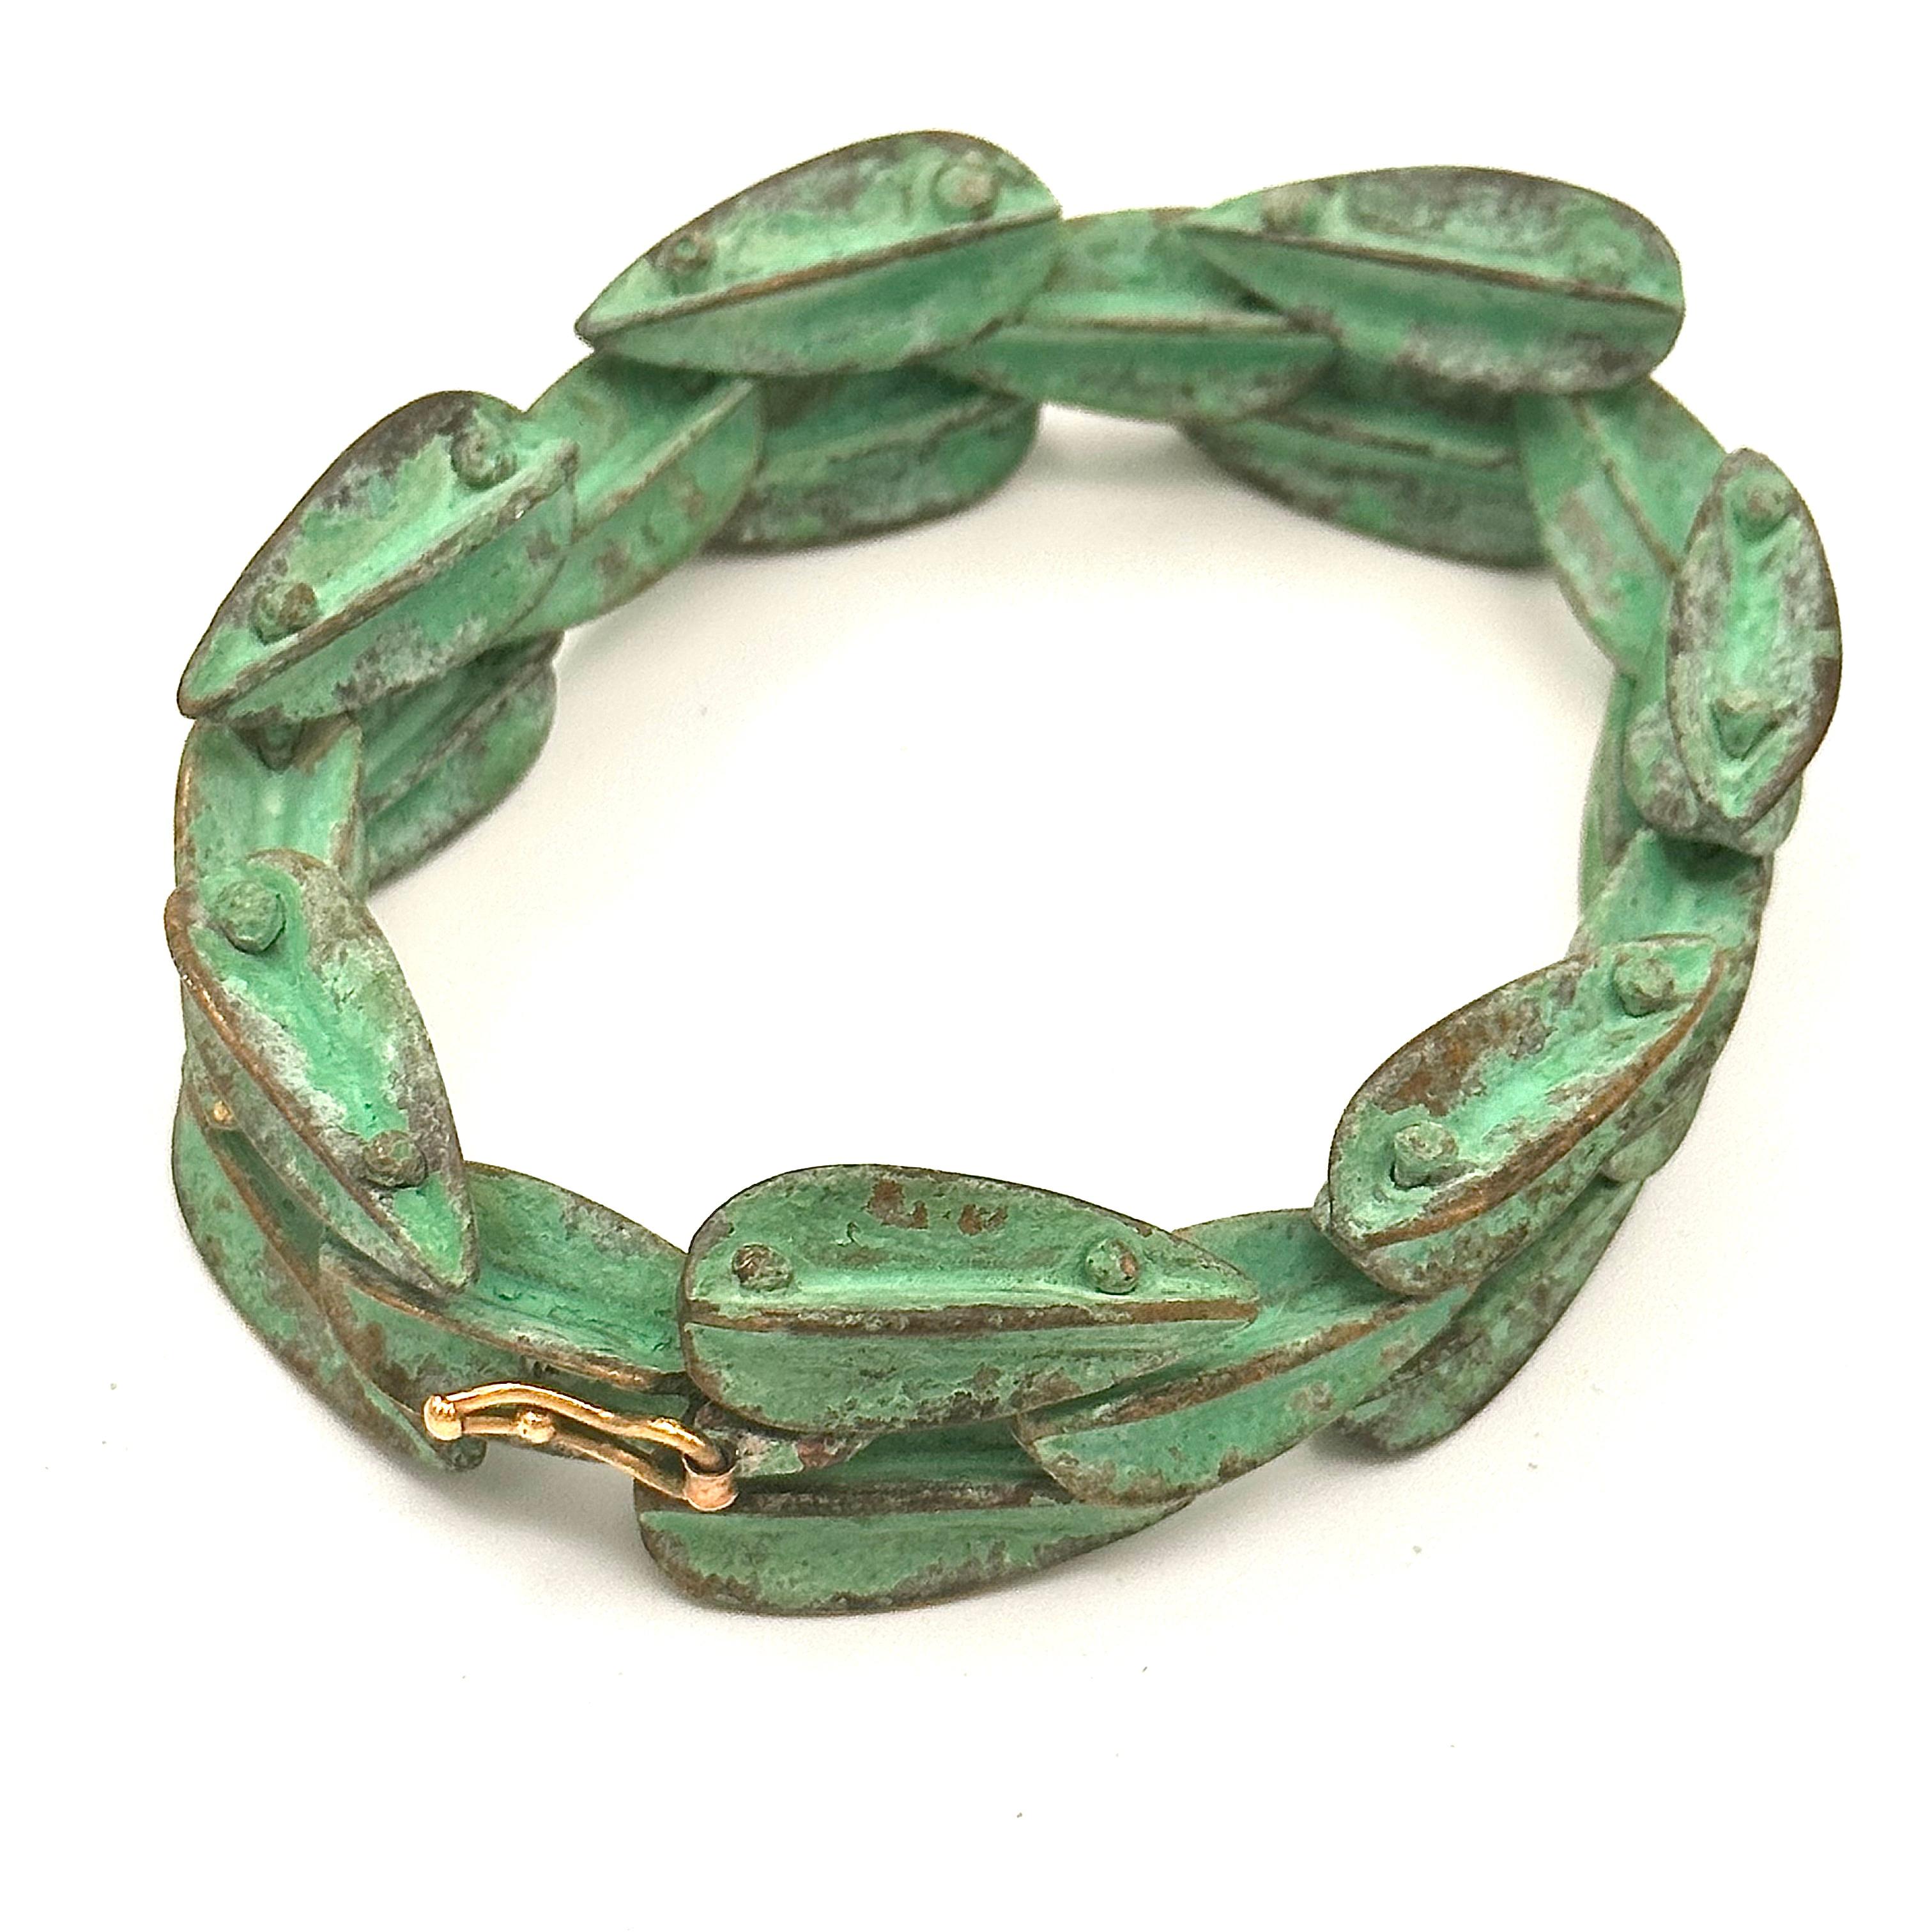 An iconic bracelet by Robert Lee Morris from 1982, of brass Dart castings that are riveted in a 2x1 configuration is in stunning green verdigris, a very Wabi Sabi finish. The edges of the Darts will show wear while the inside areas stay bright green